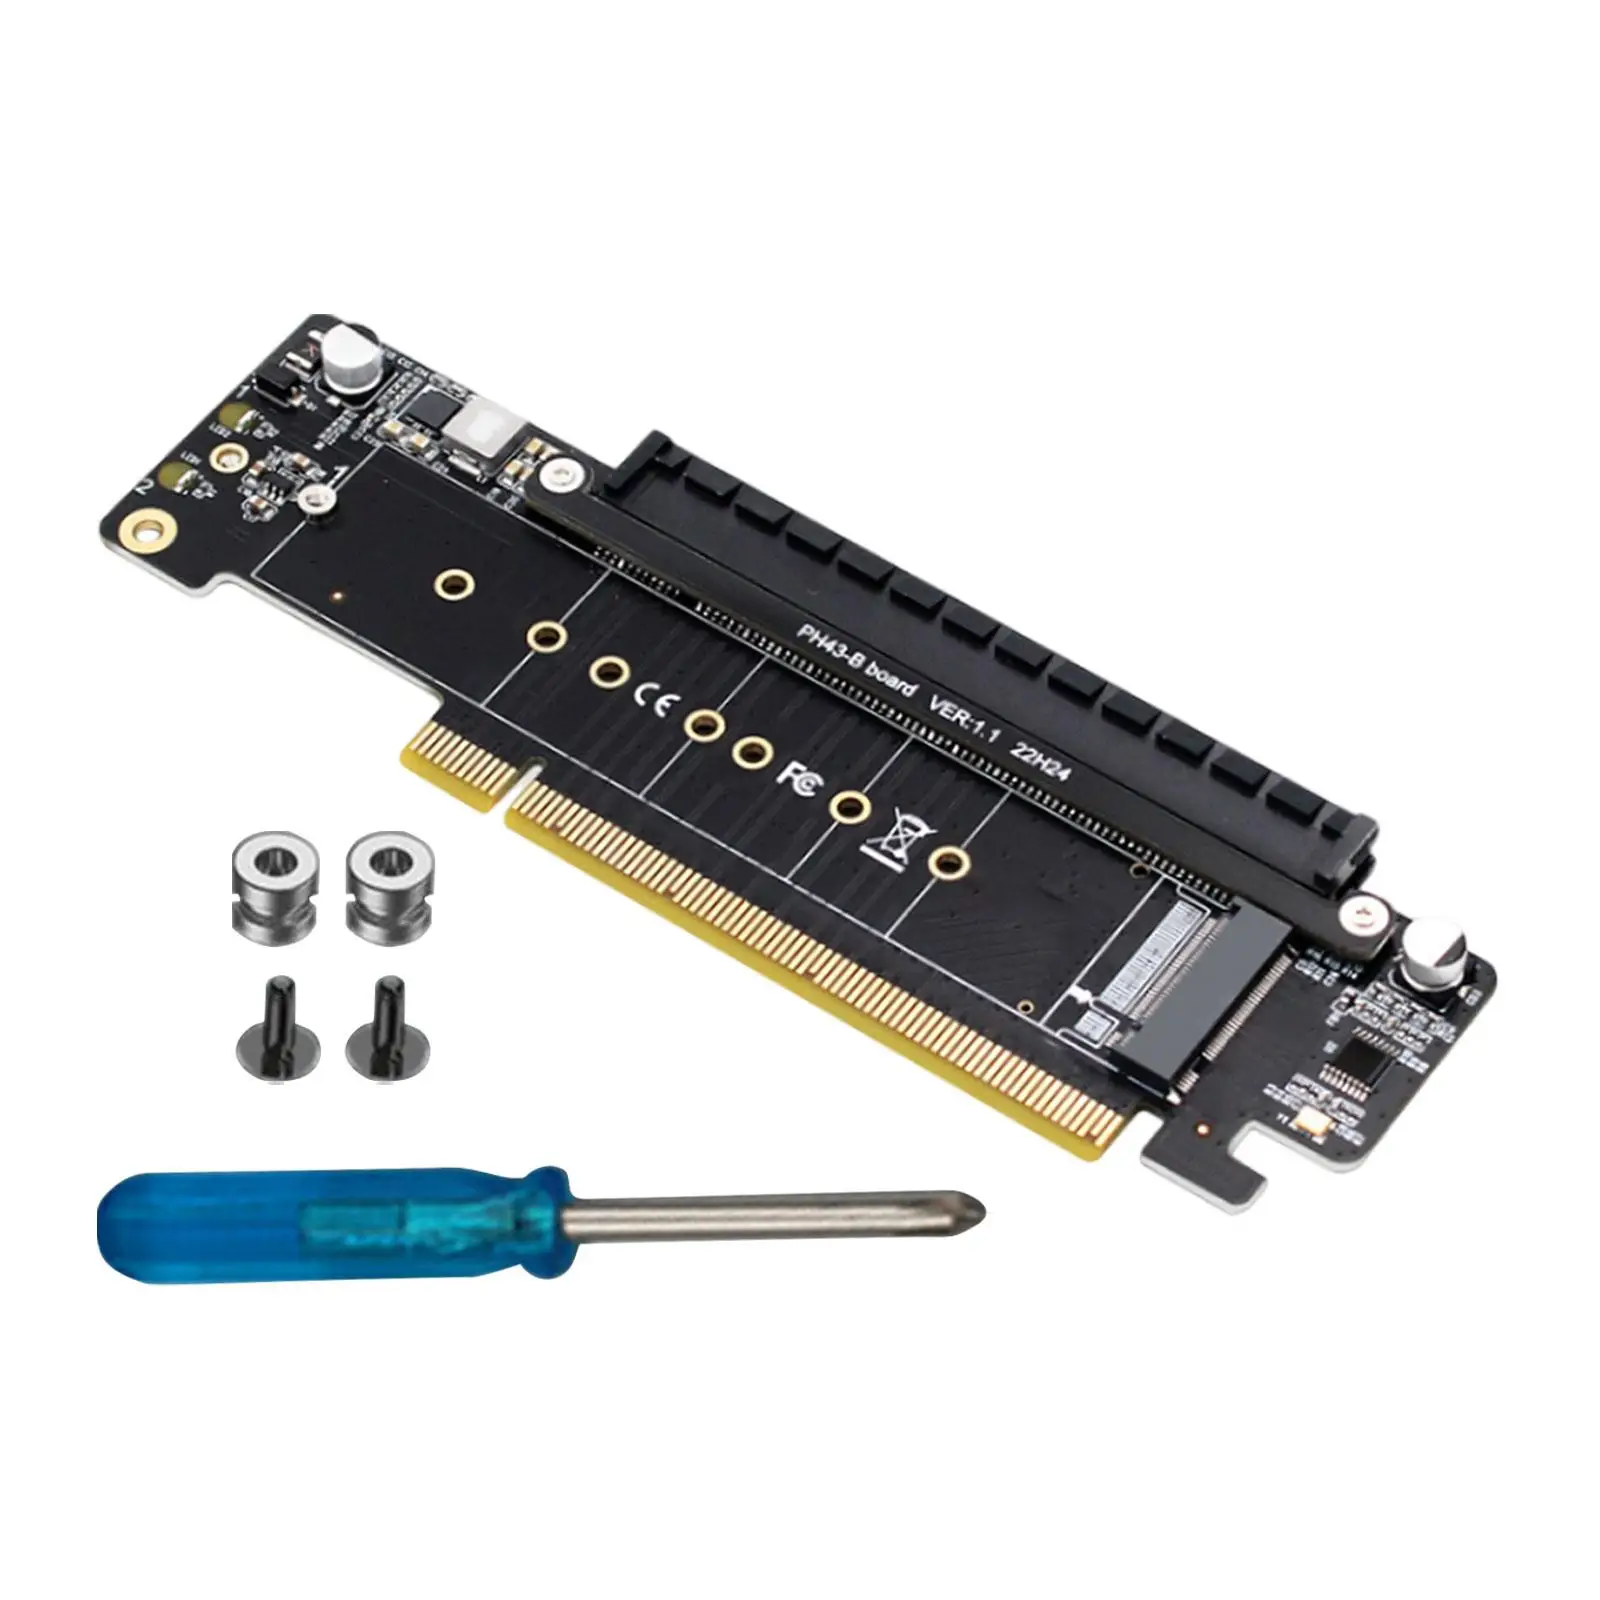 PCIe 4.0 x16 to 4x Expansion Card Metal Reliable Support 22110, 2280, 2260, 2242, 2230 Adapter Card Dual M.2 Adapter Accessories